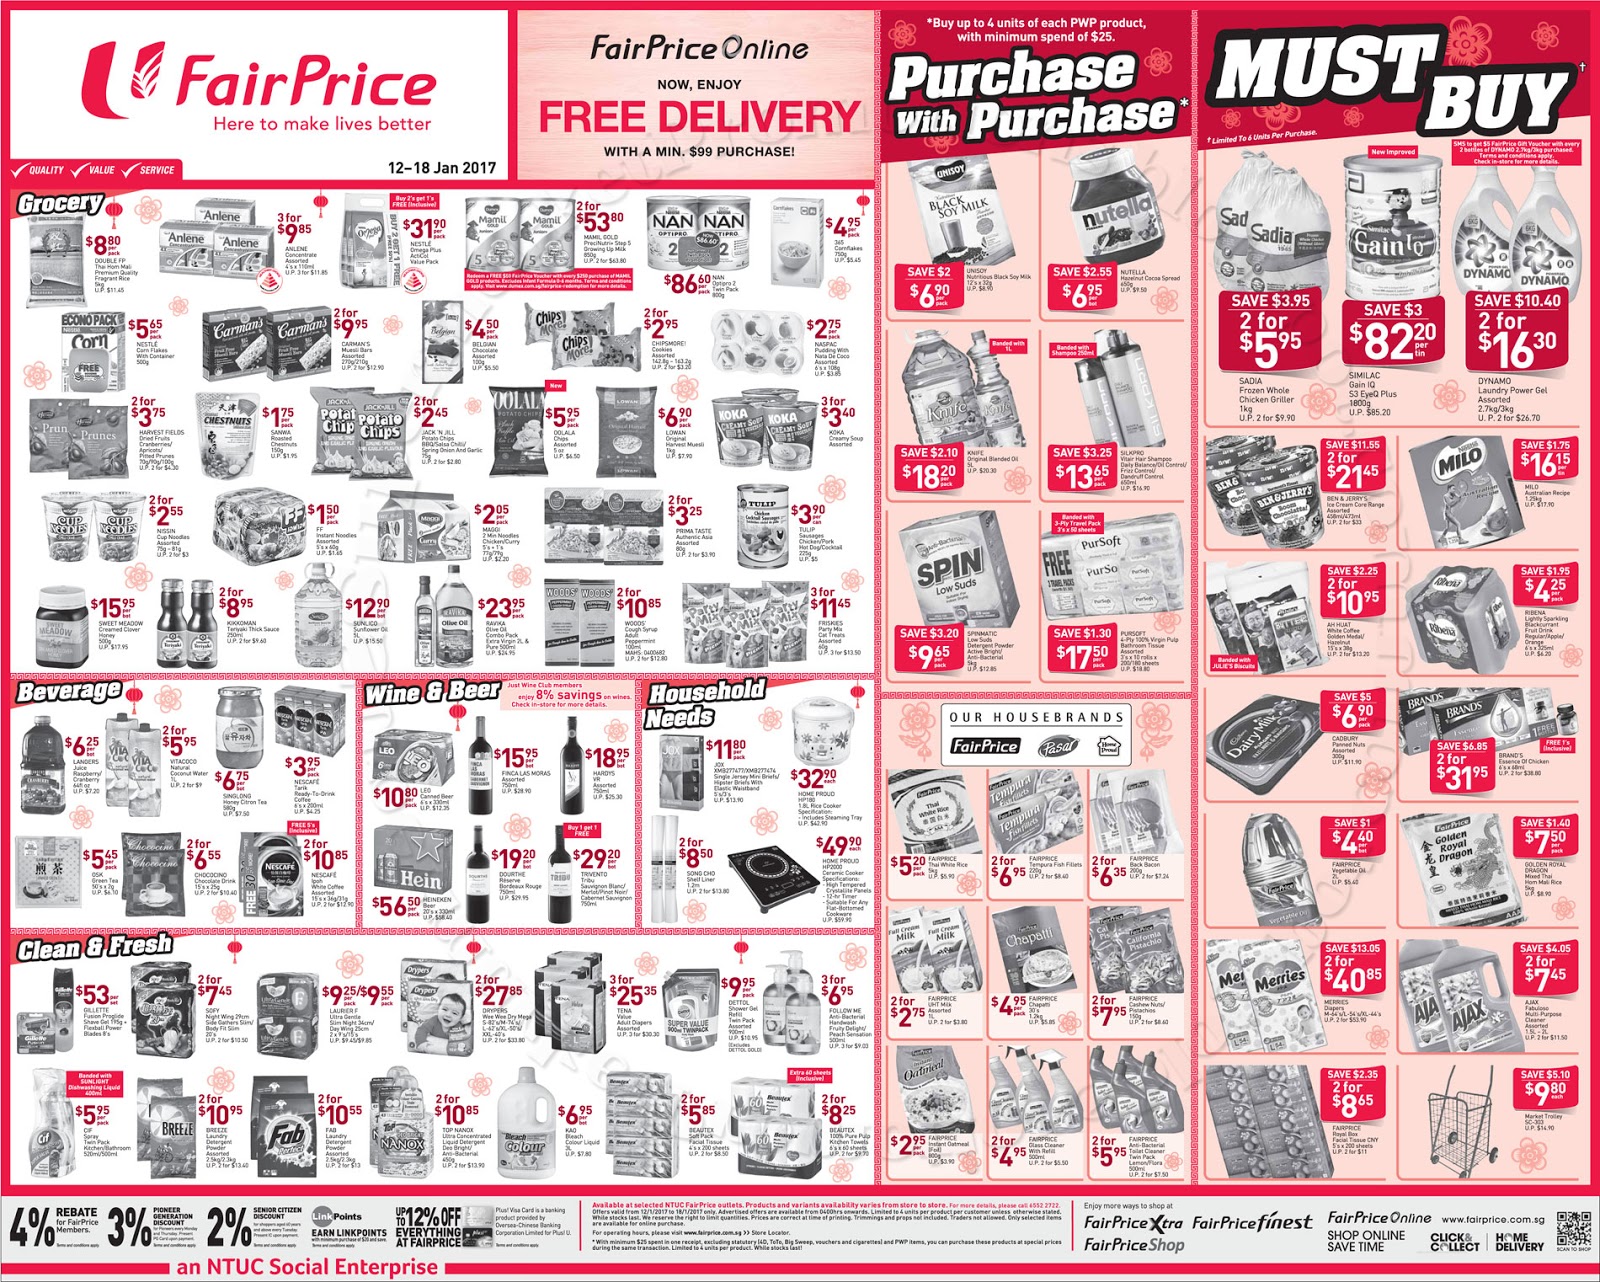 NTUC FairPrice Weekly Promotion 12 - 18 January 2017 ~ Supermarket Promotions